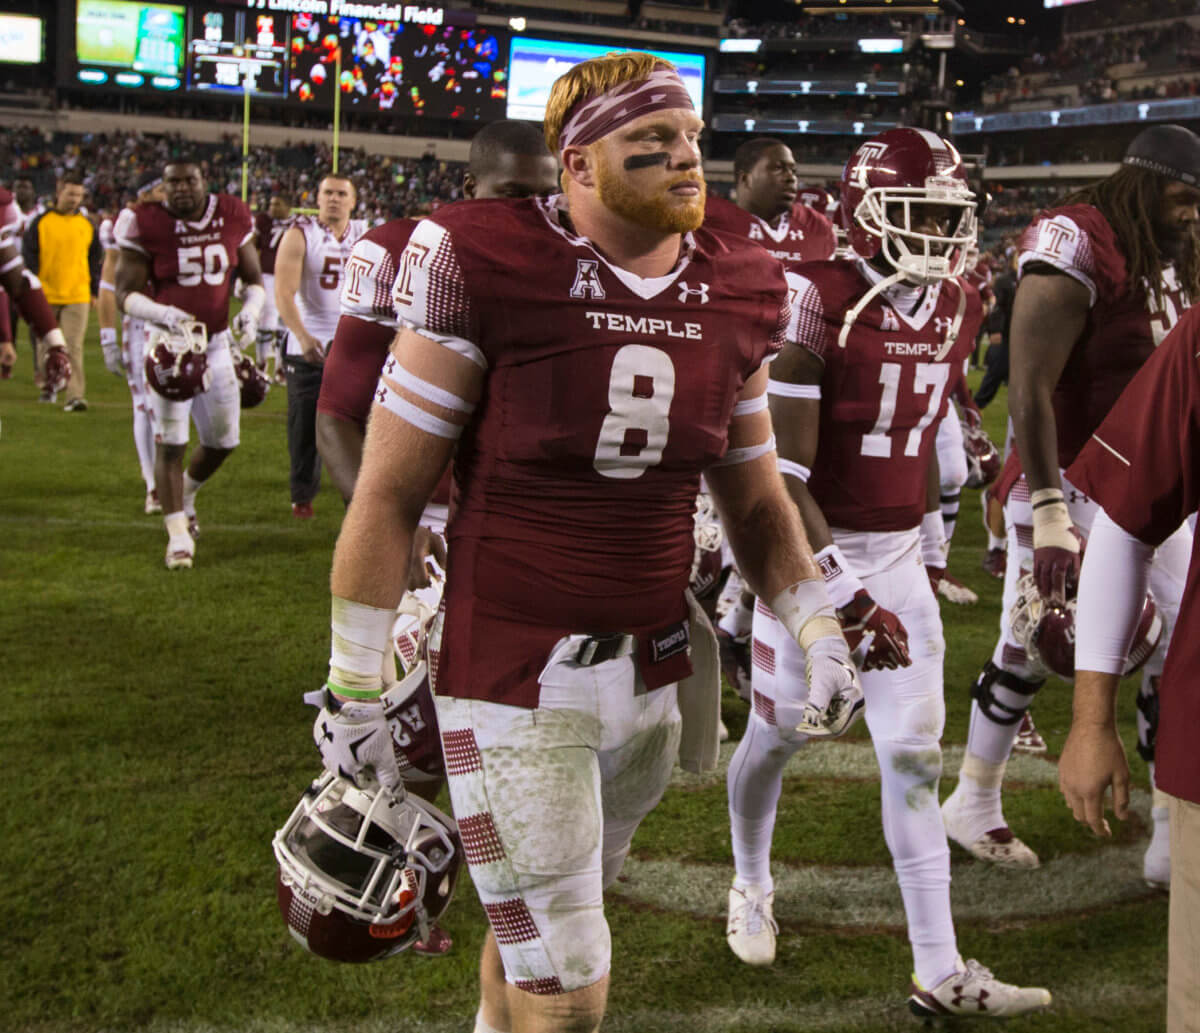 Temple holds its own on national stage, despite heart-breaking loss